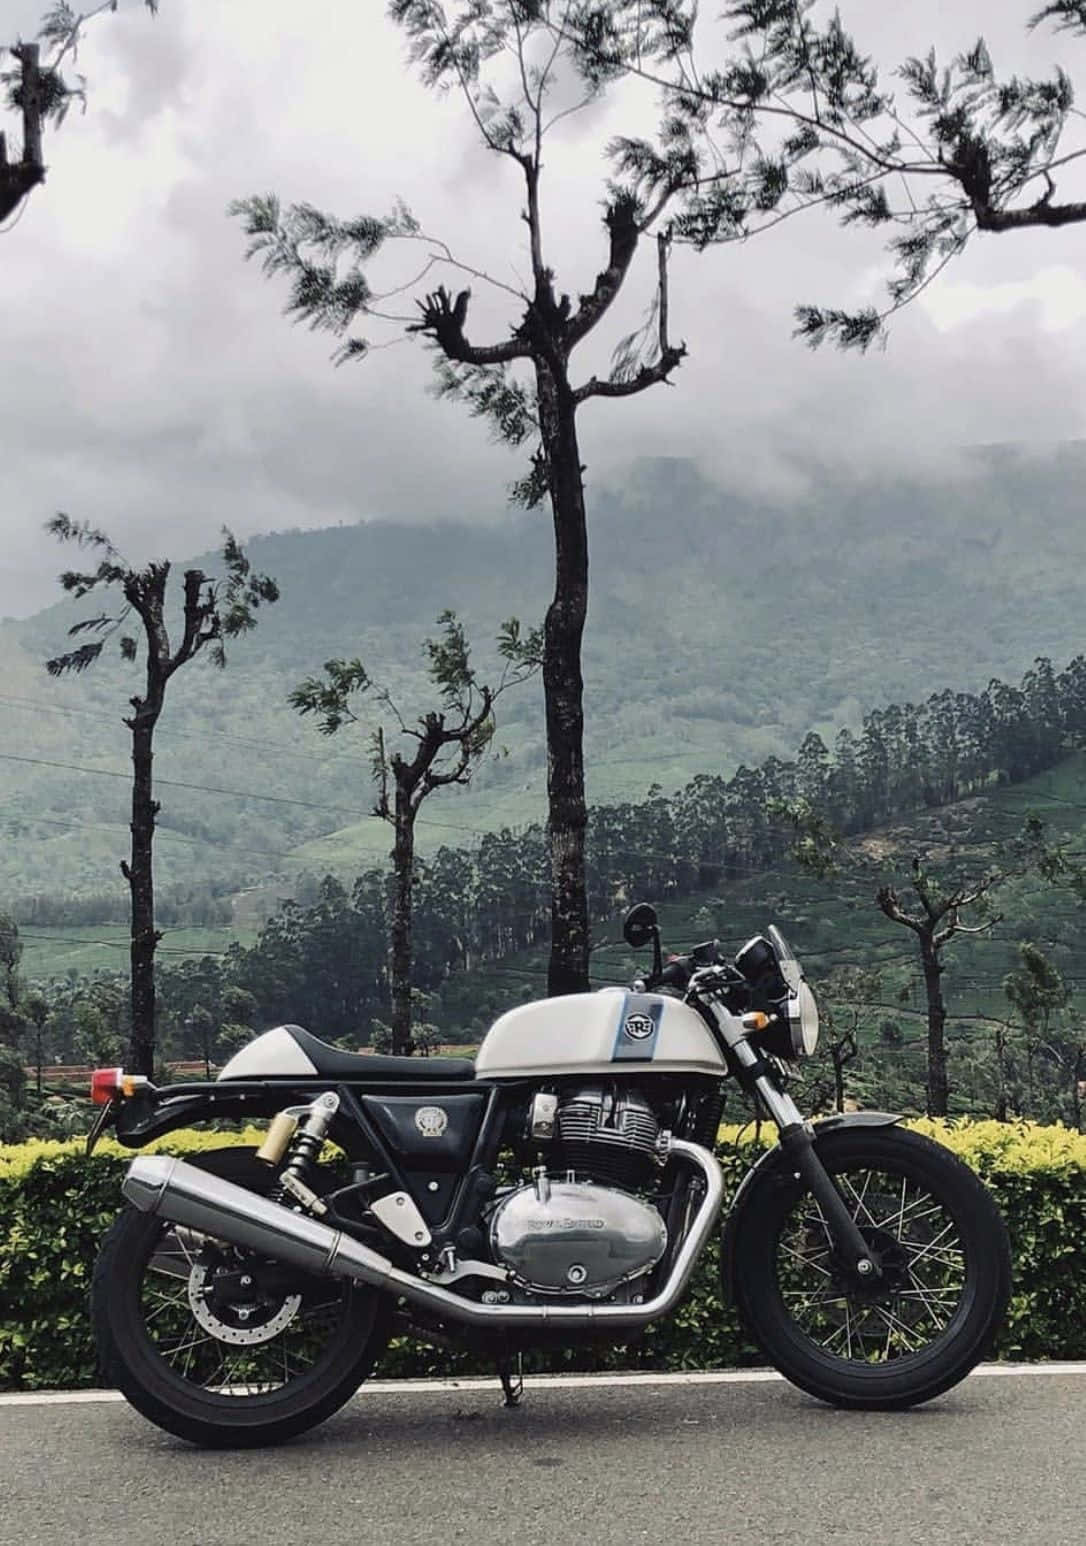 The classic look of the Royal Enfield Bullet motorbike